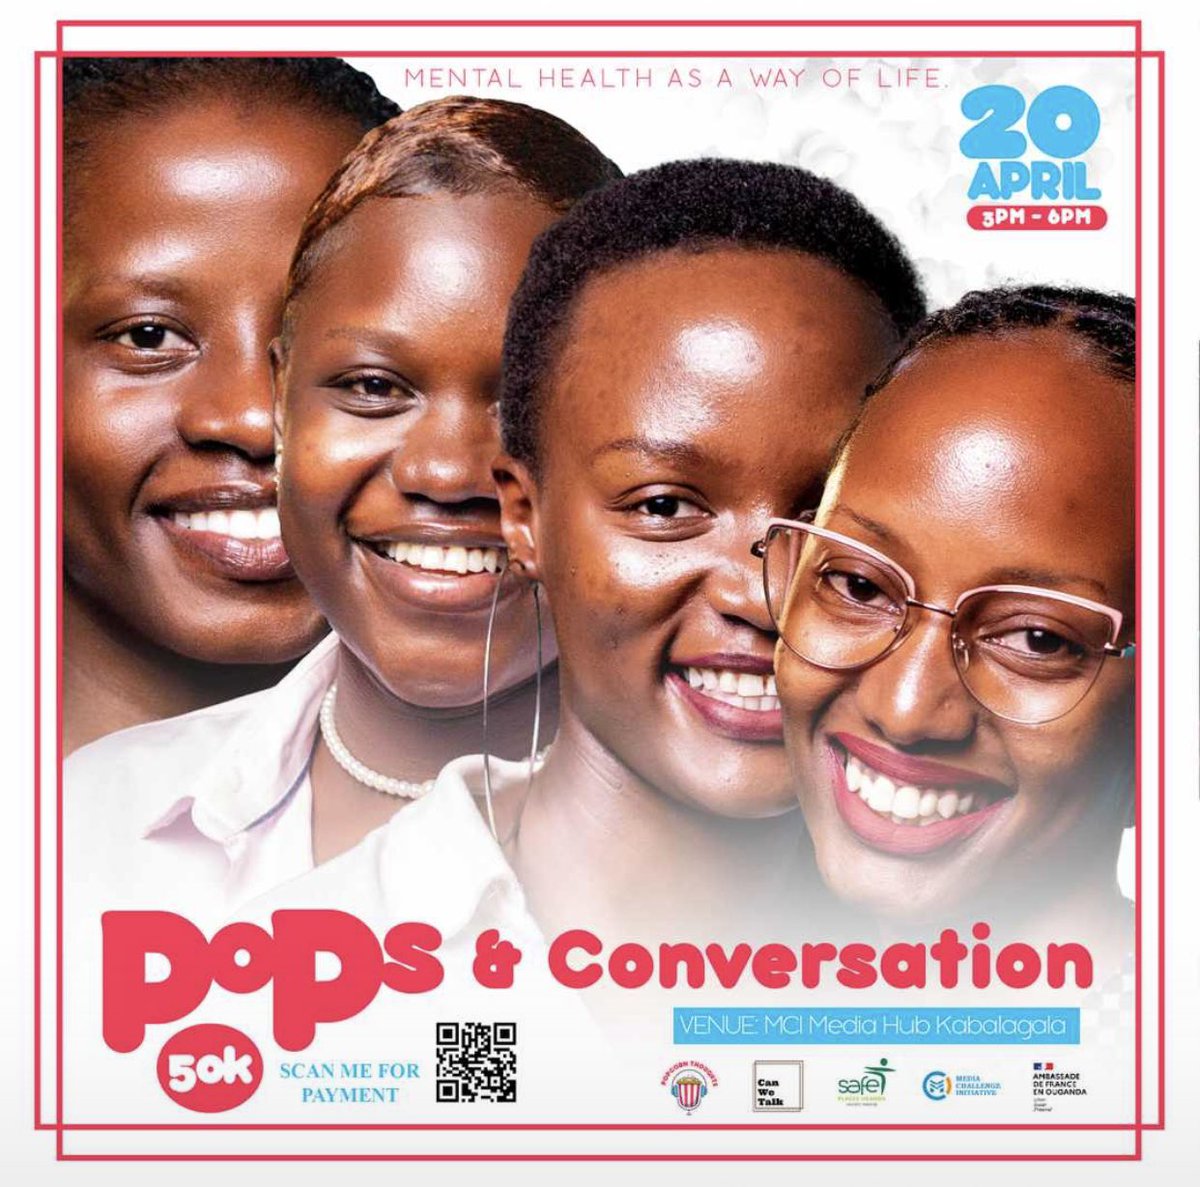 Have you signed up for this? @_Akello has curated a sit down session with the ladies from @can_we_talk_256 and Angella, a psychologist from @safe_treatment as she records her final episode of popcorn thoughts. Come through 🫶🏿 Buy ticket here: ticket.ug/pnc